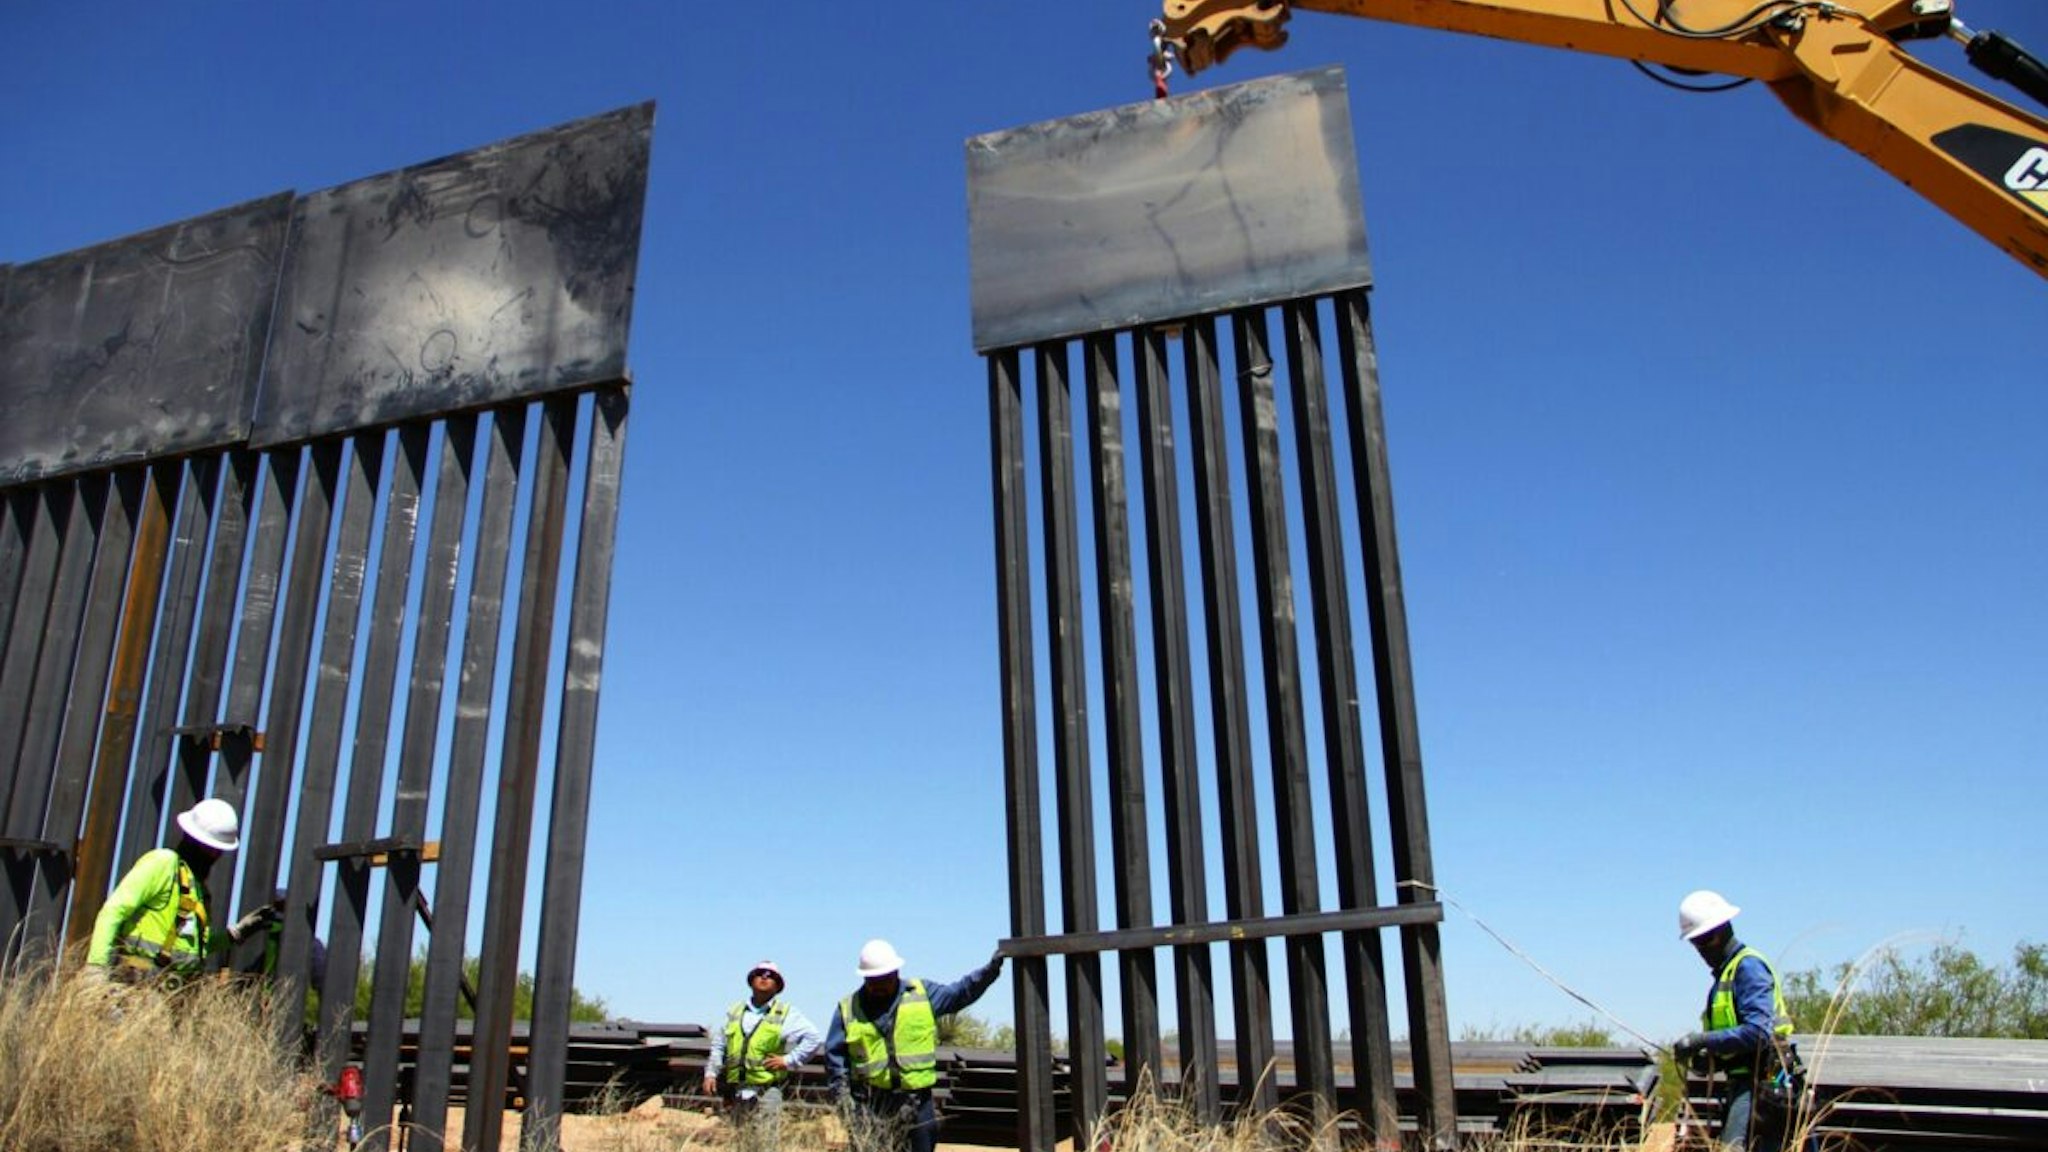 Workers replace an old section of the wall between the US and Mexico following orders by US President Donald Trump, in Santa Teresa, New Mexico State, US, close to Ciudad Juarez in Mexico's Chihuahua State, on April 23, 2018.